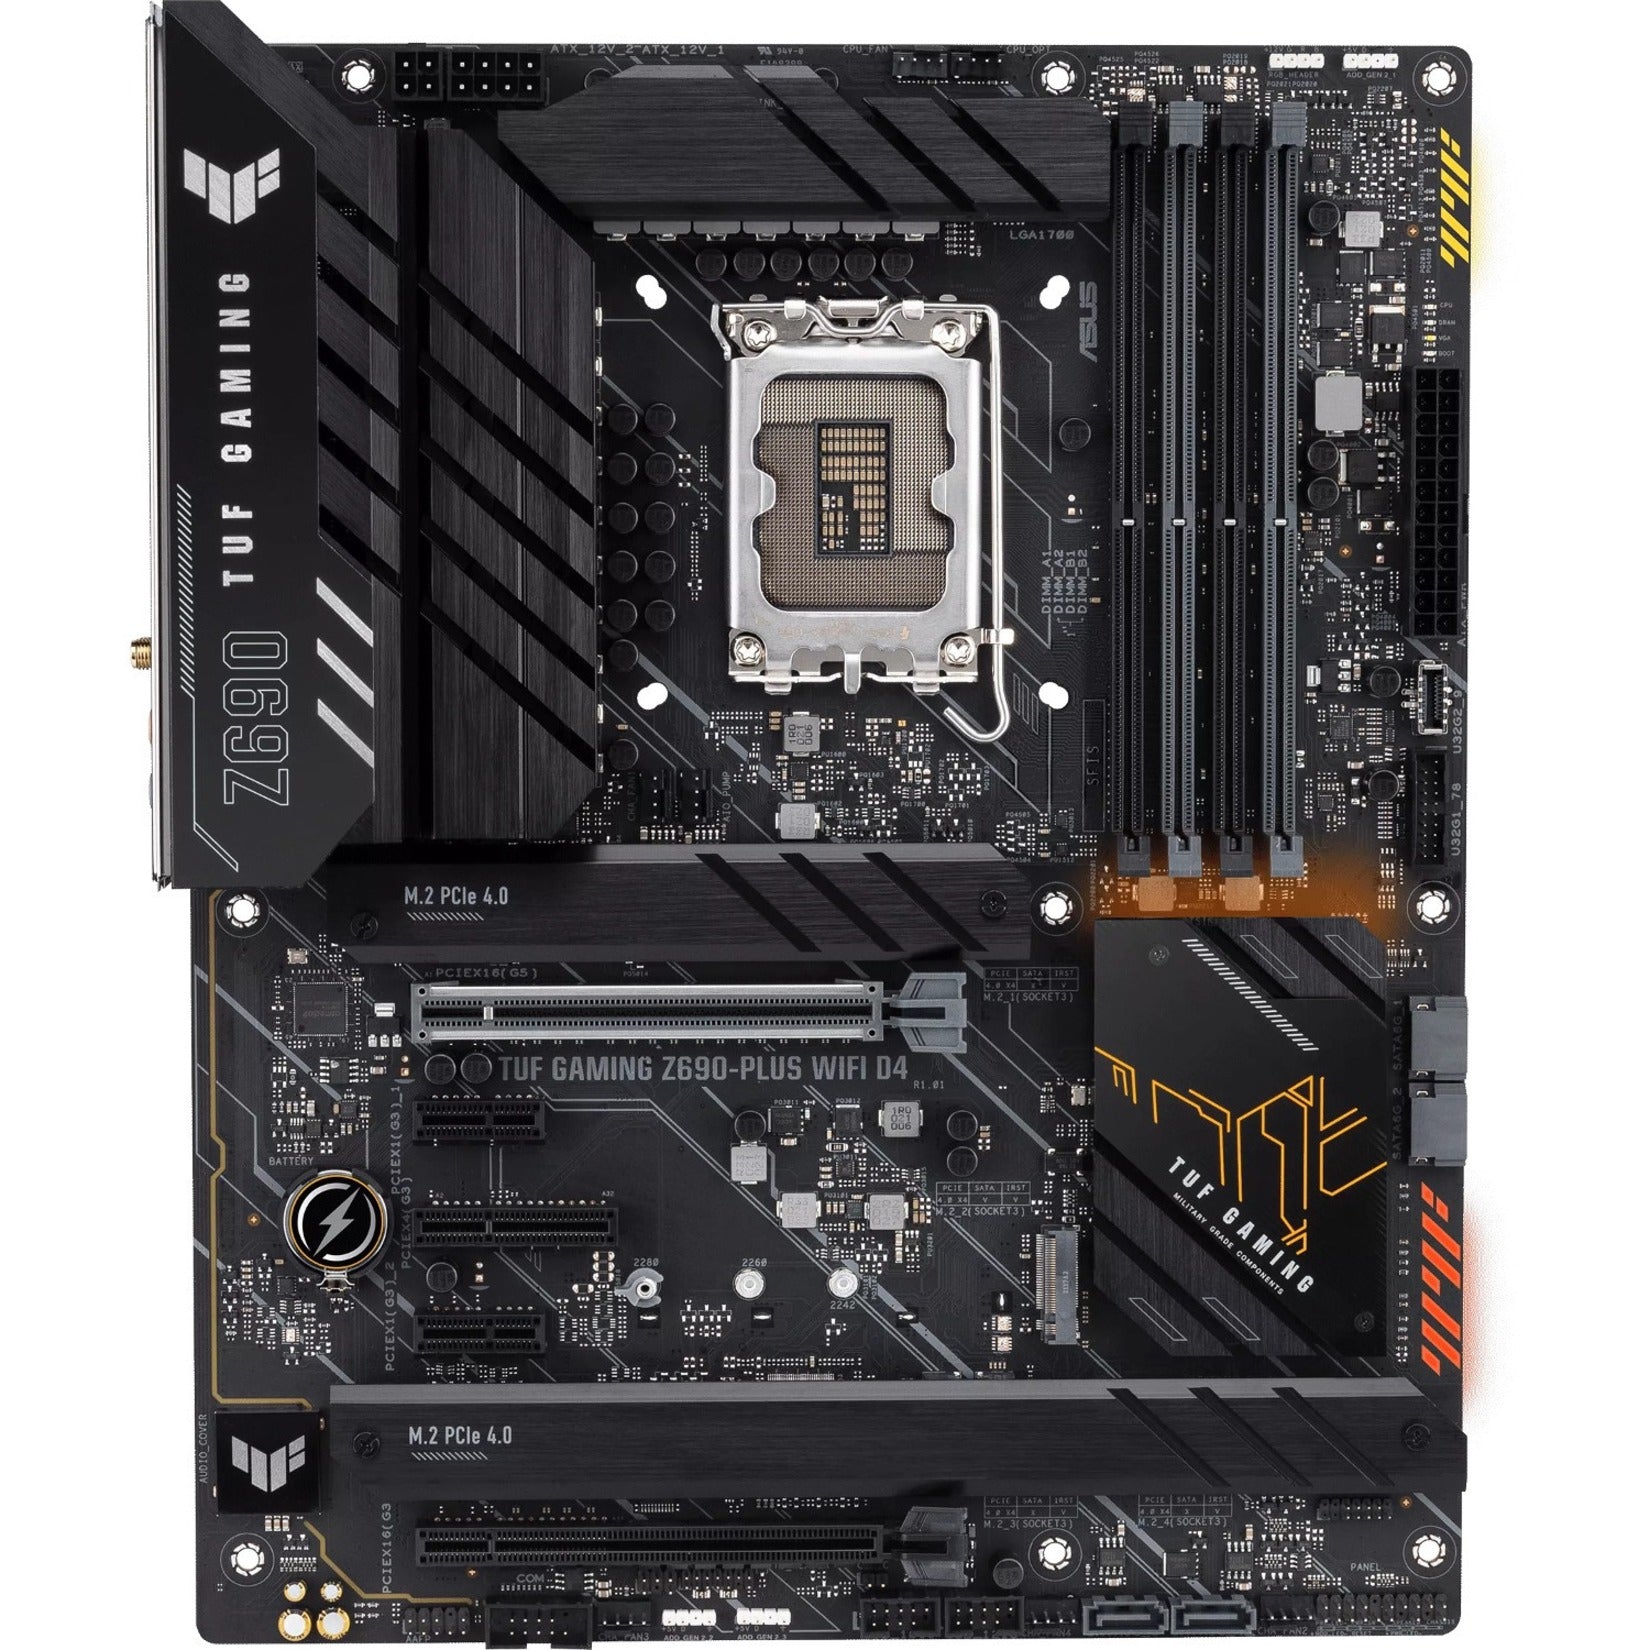 ASUS TUF GAMING Z690-PLUS WiFi D4 Desktop Motherboard TUF GAMING Z690-PLUS WIFI D4, Military-Grade Components, Game-Ready Features, 12th Gen Intel Core Processor Support